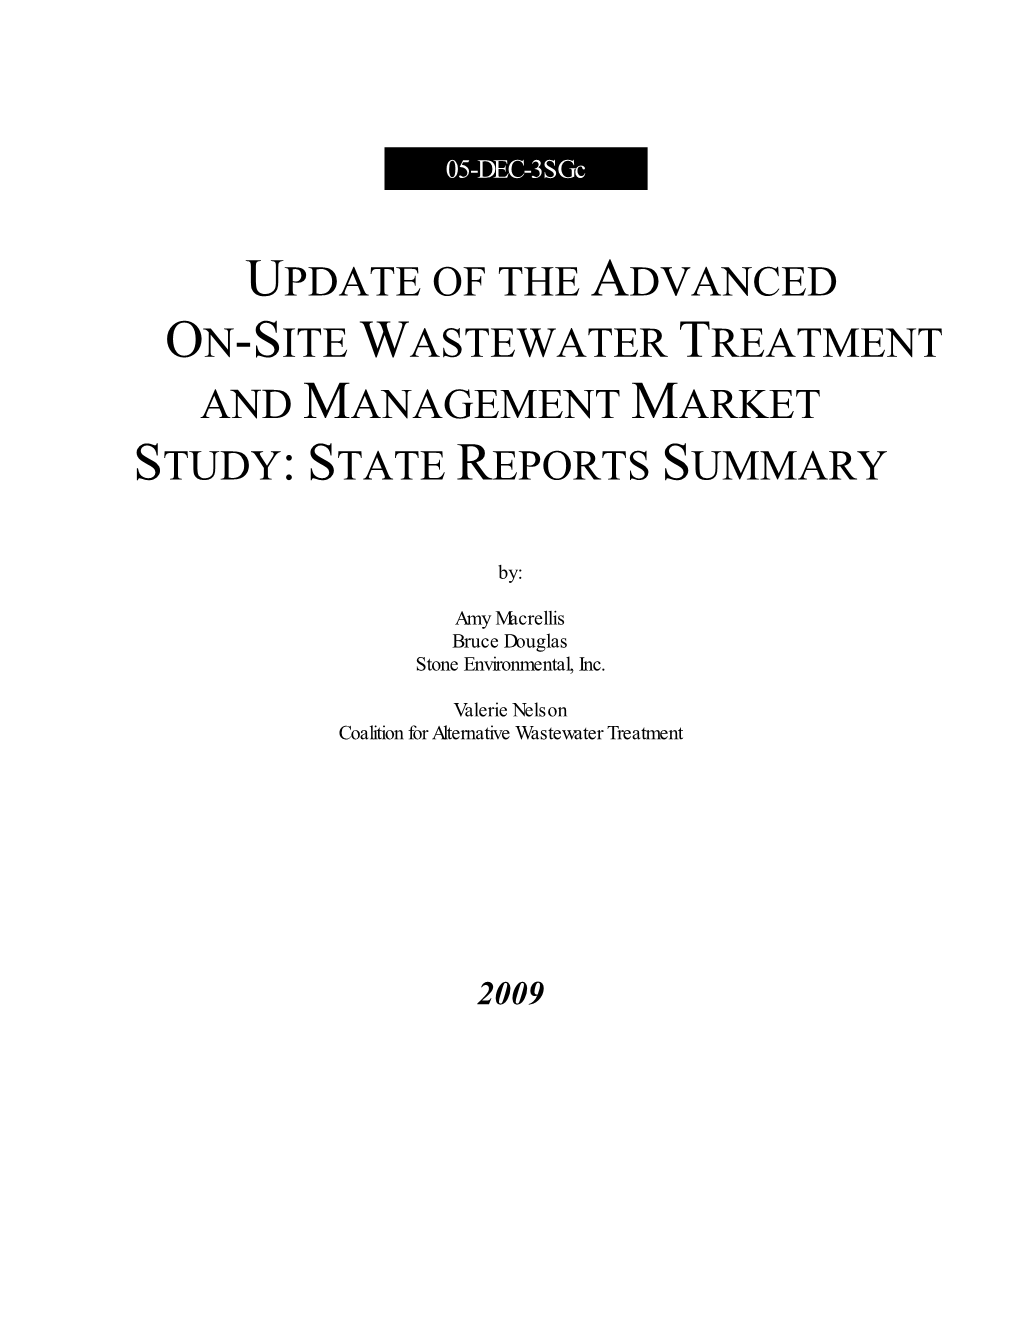 Update of the Advanced On-Site Wastewater Treatment and Management Market Study: State Reports Summary